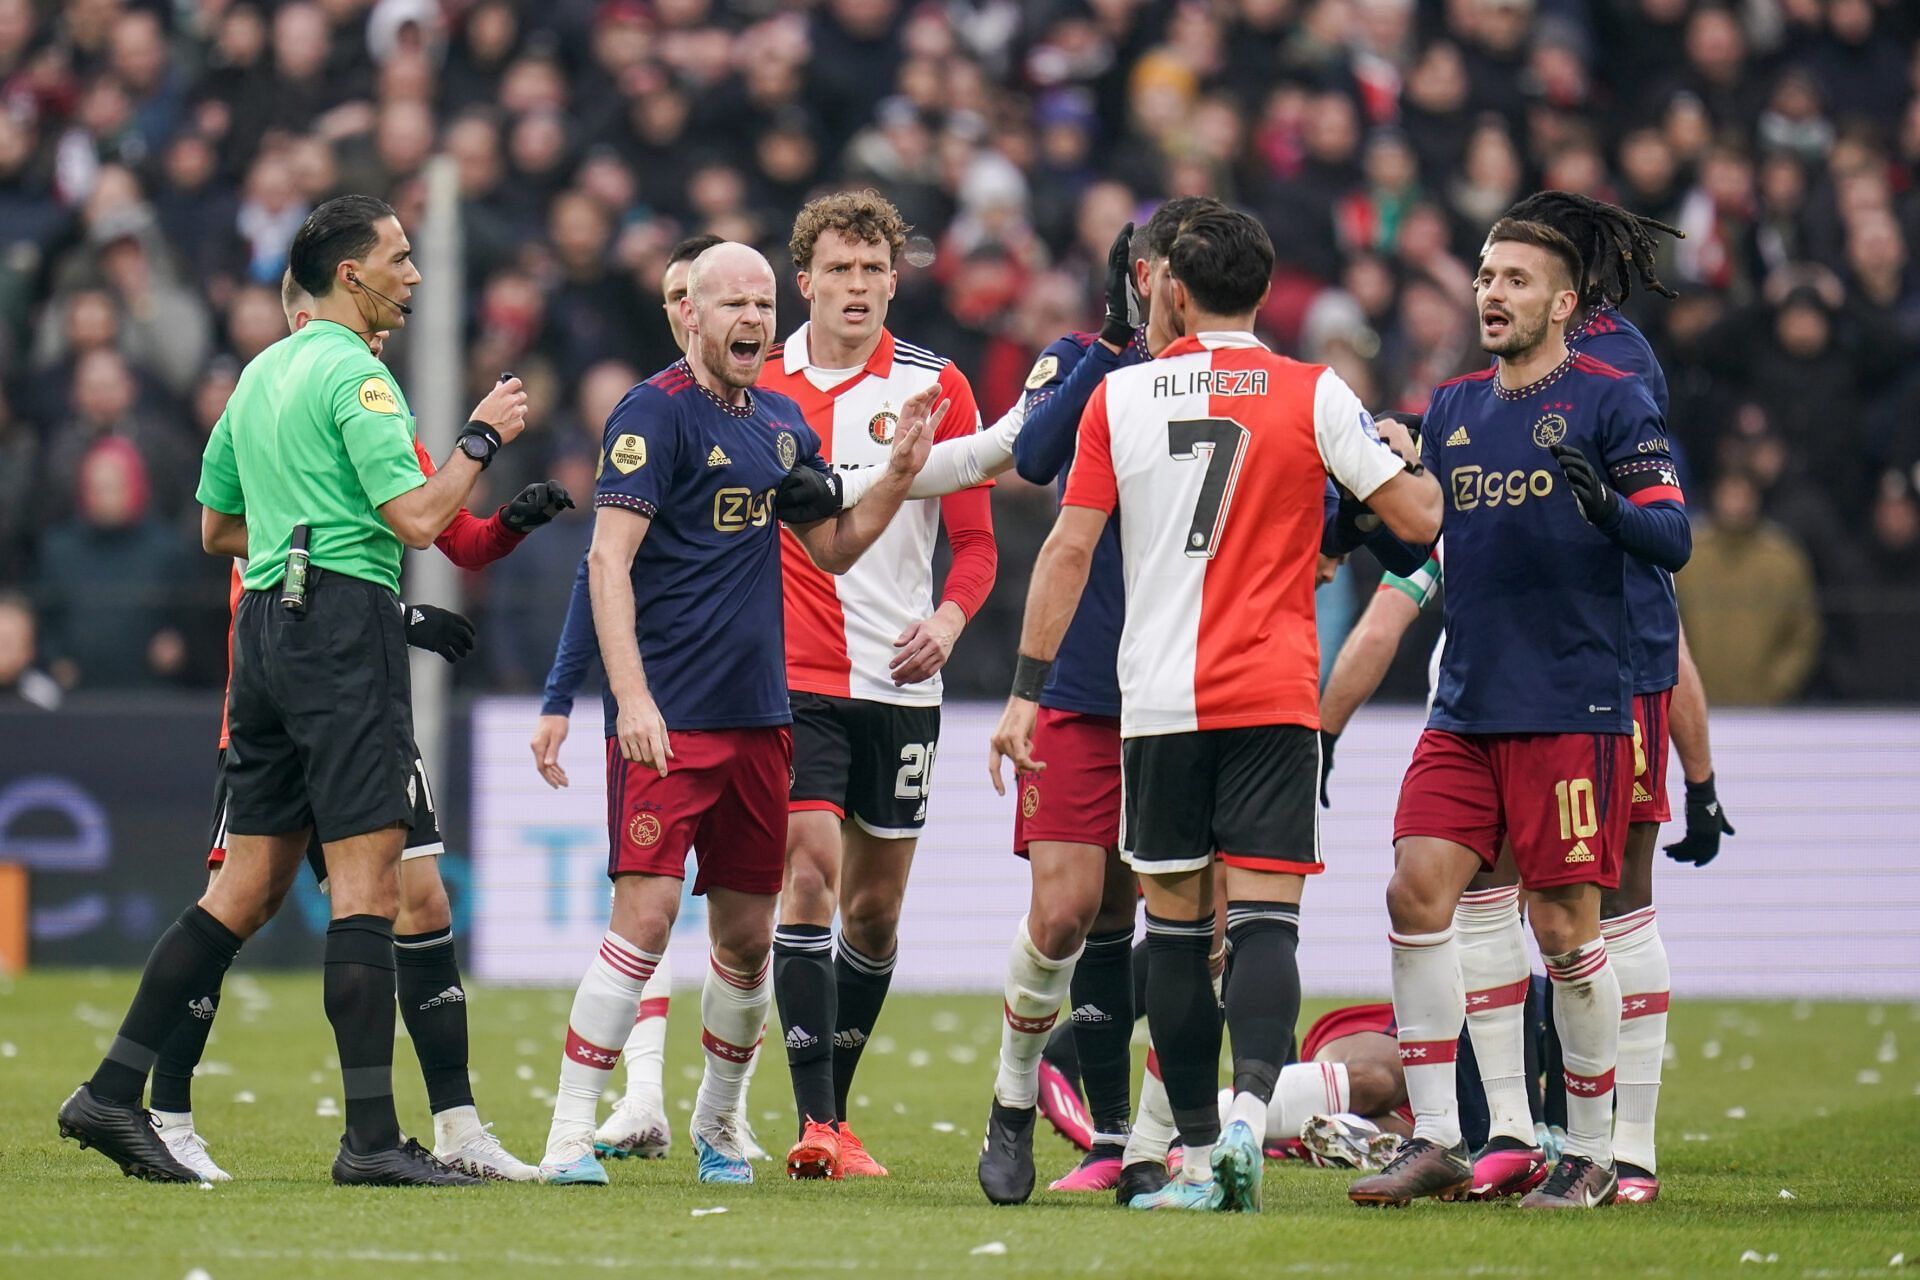 Ajax and Feyenoord go head-to-head in the Eredivisie on Sunday.